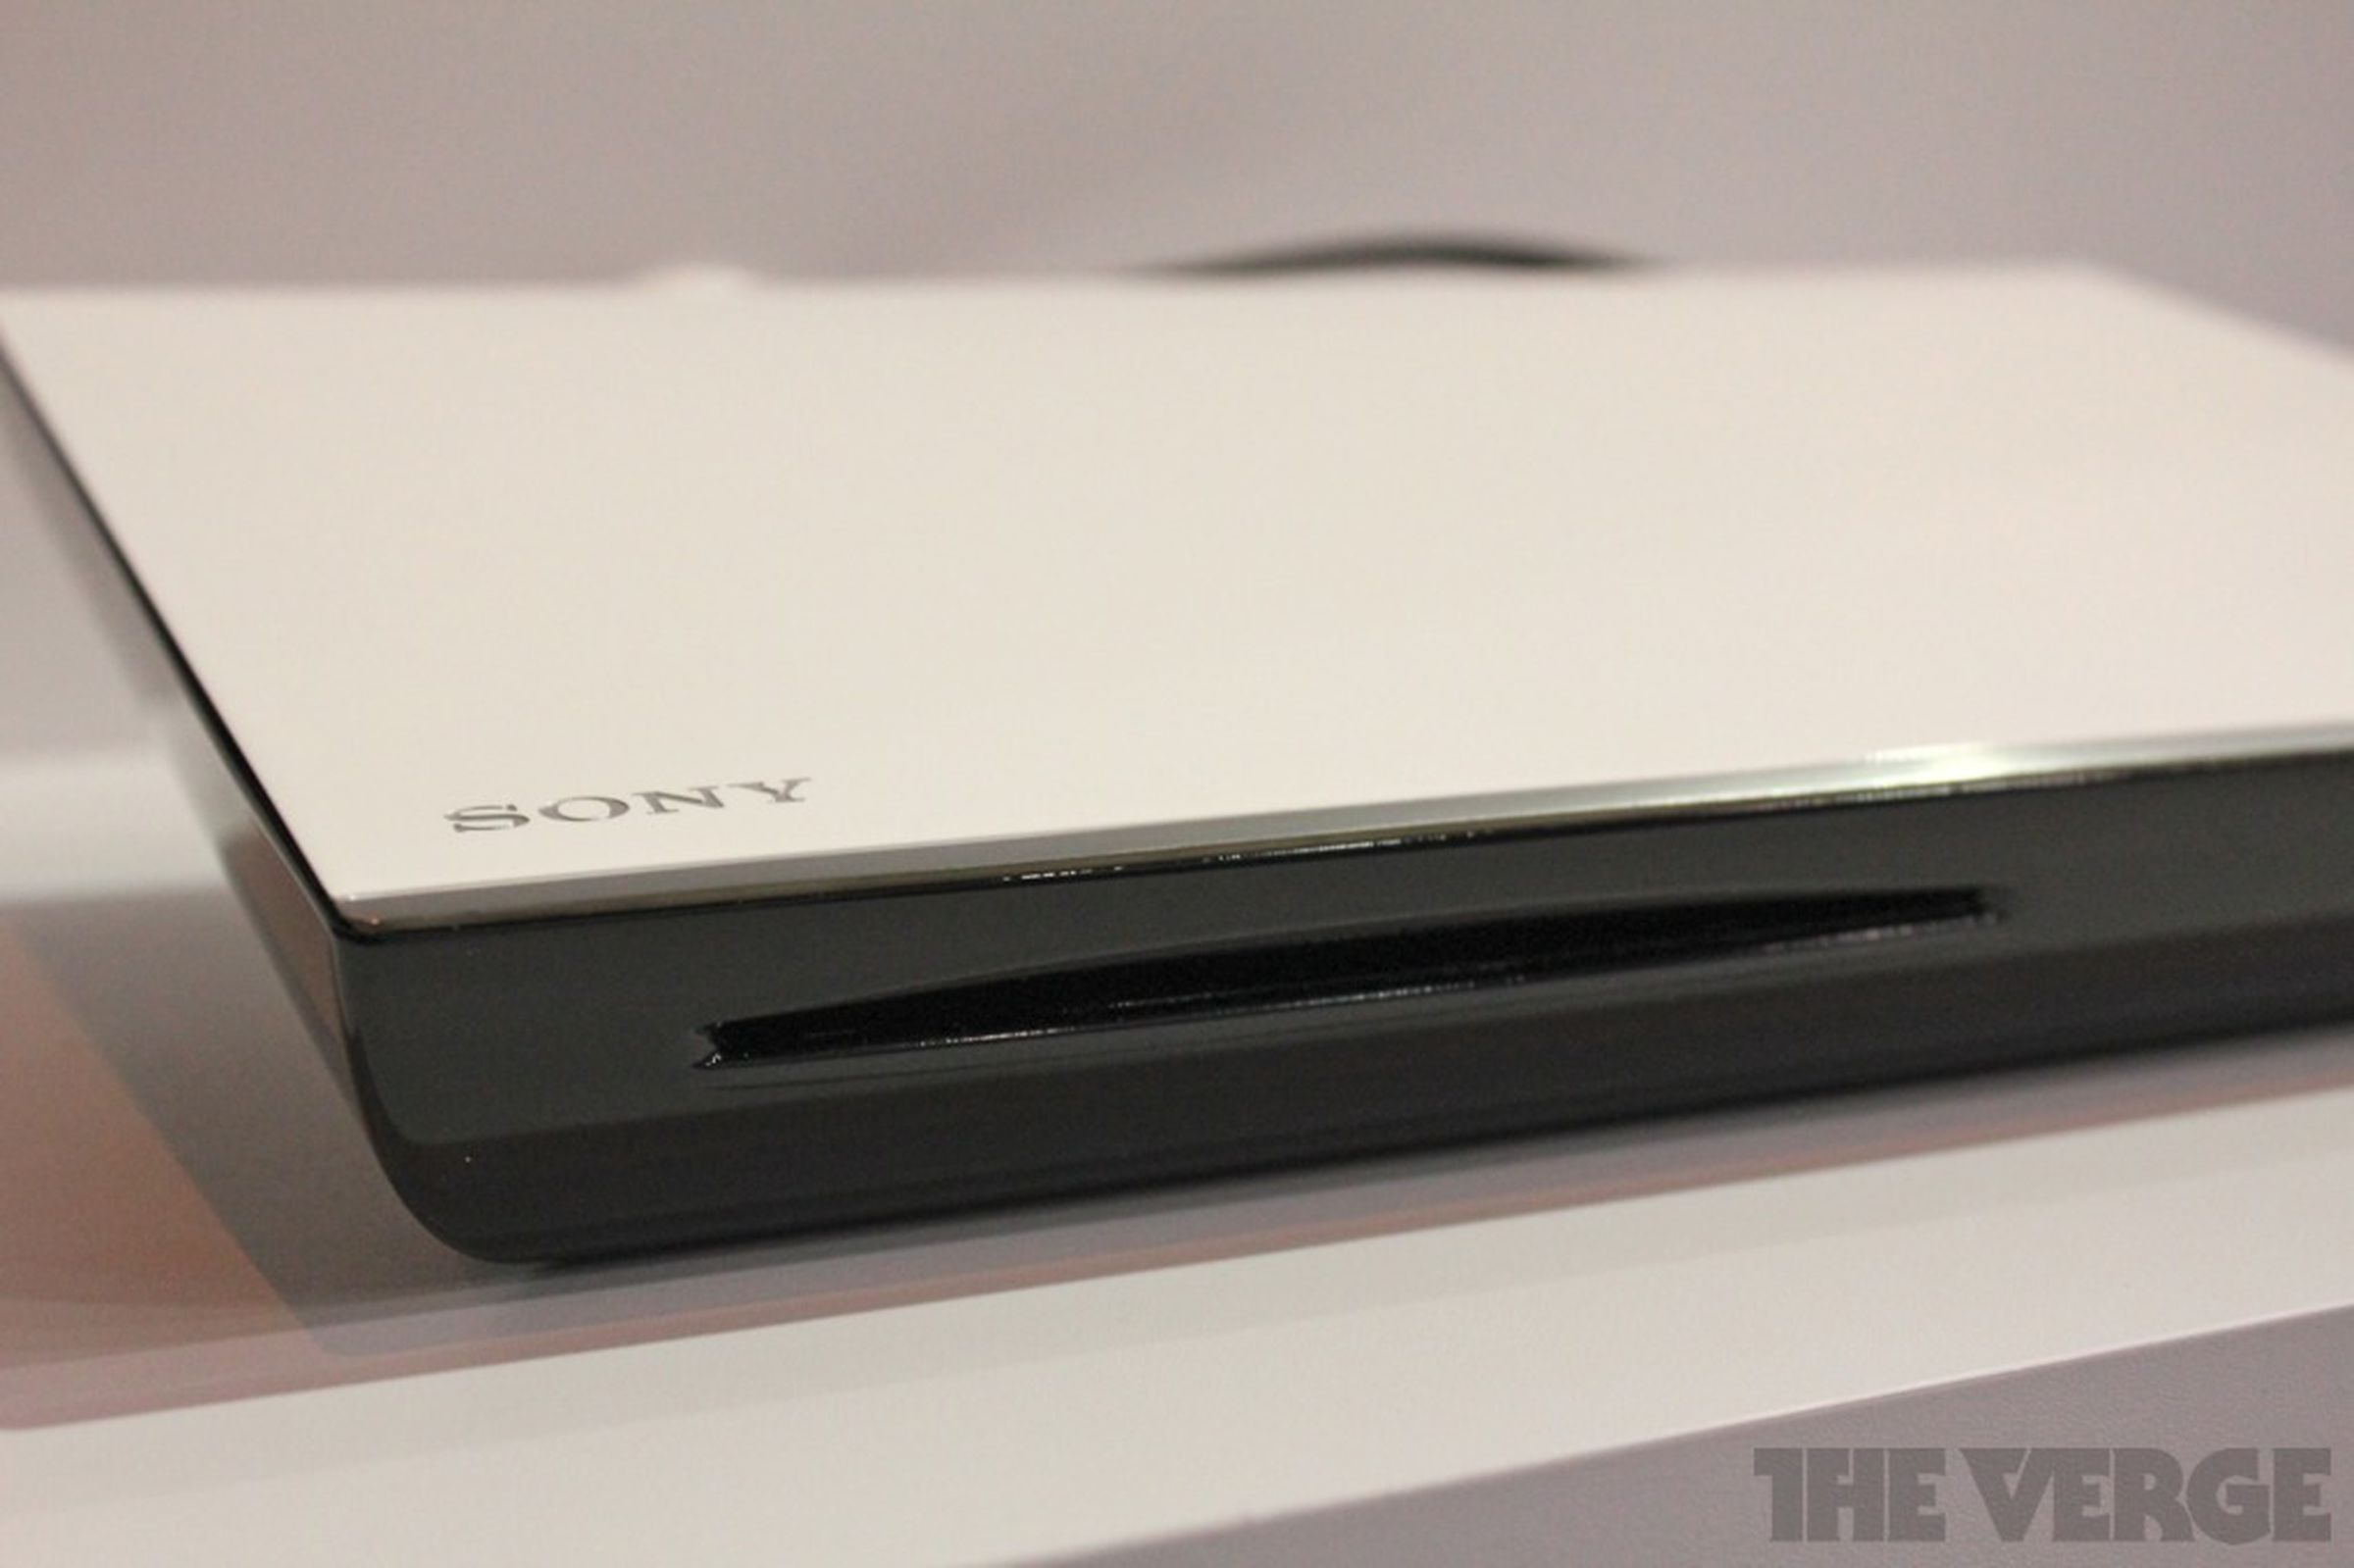 Sony Google TV-powered NSZ-GP9, NSZ-GS7, and remote hands-on pictures